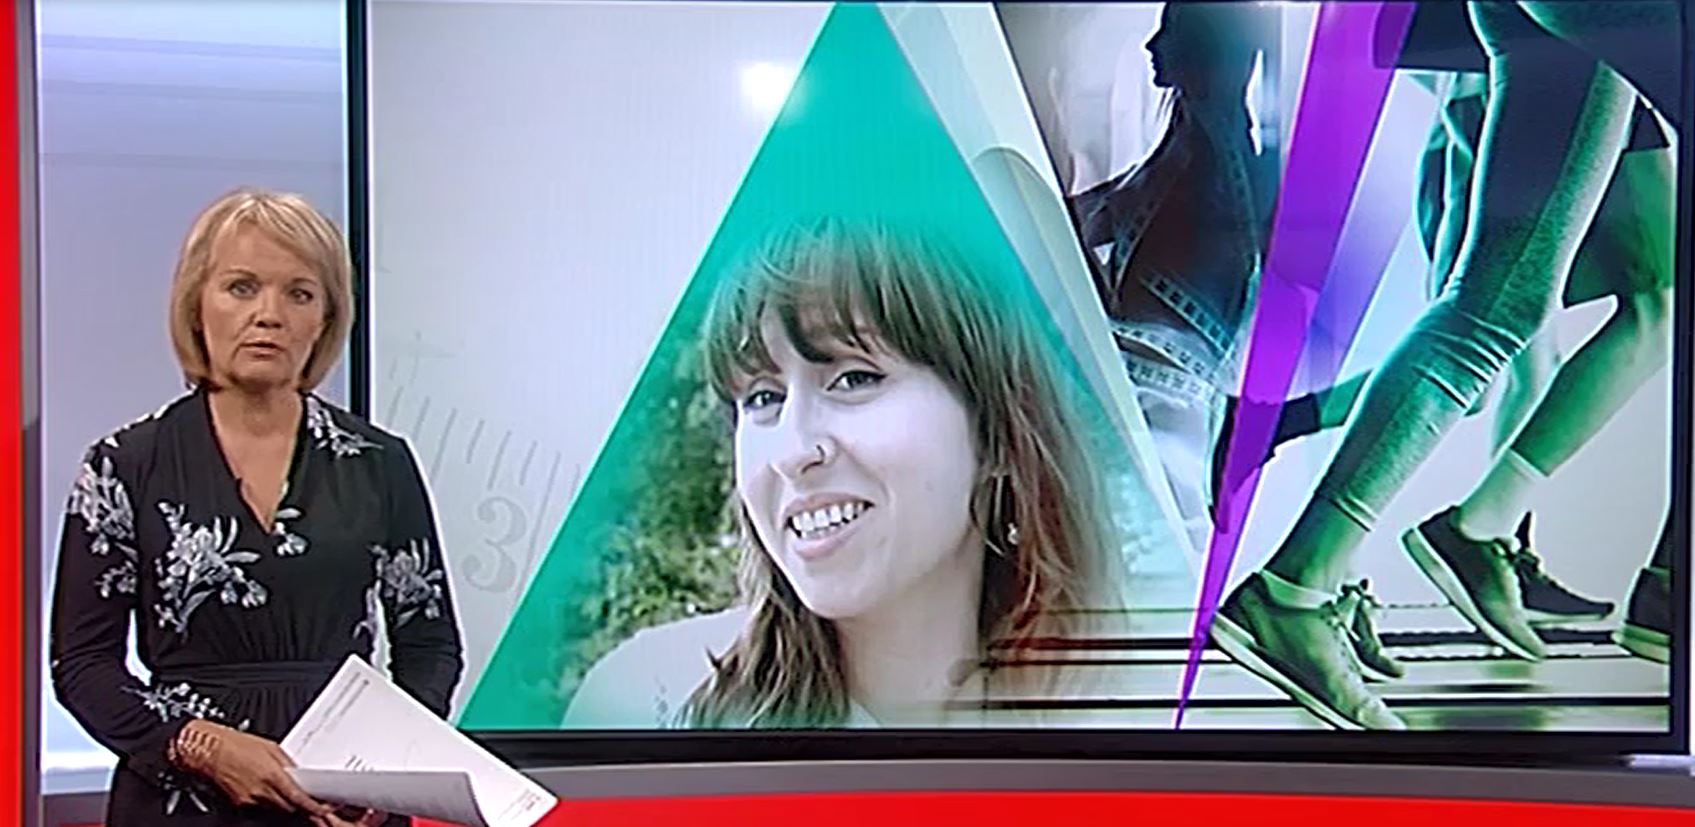 Midlands Today featured Holly's story prominently as part of Mental Health  Awareness Week.